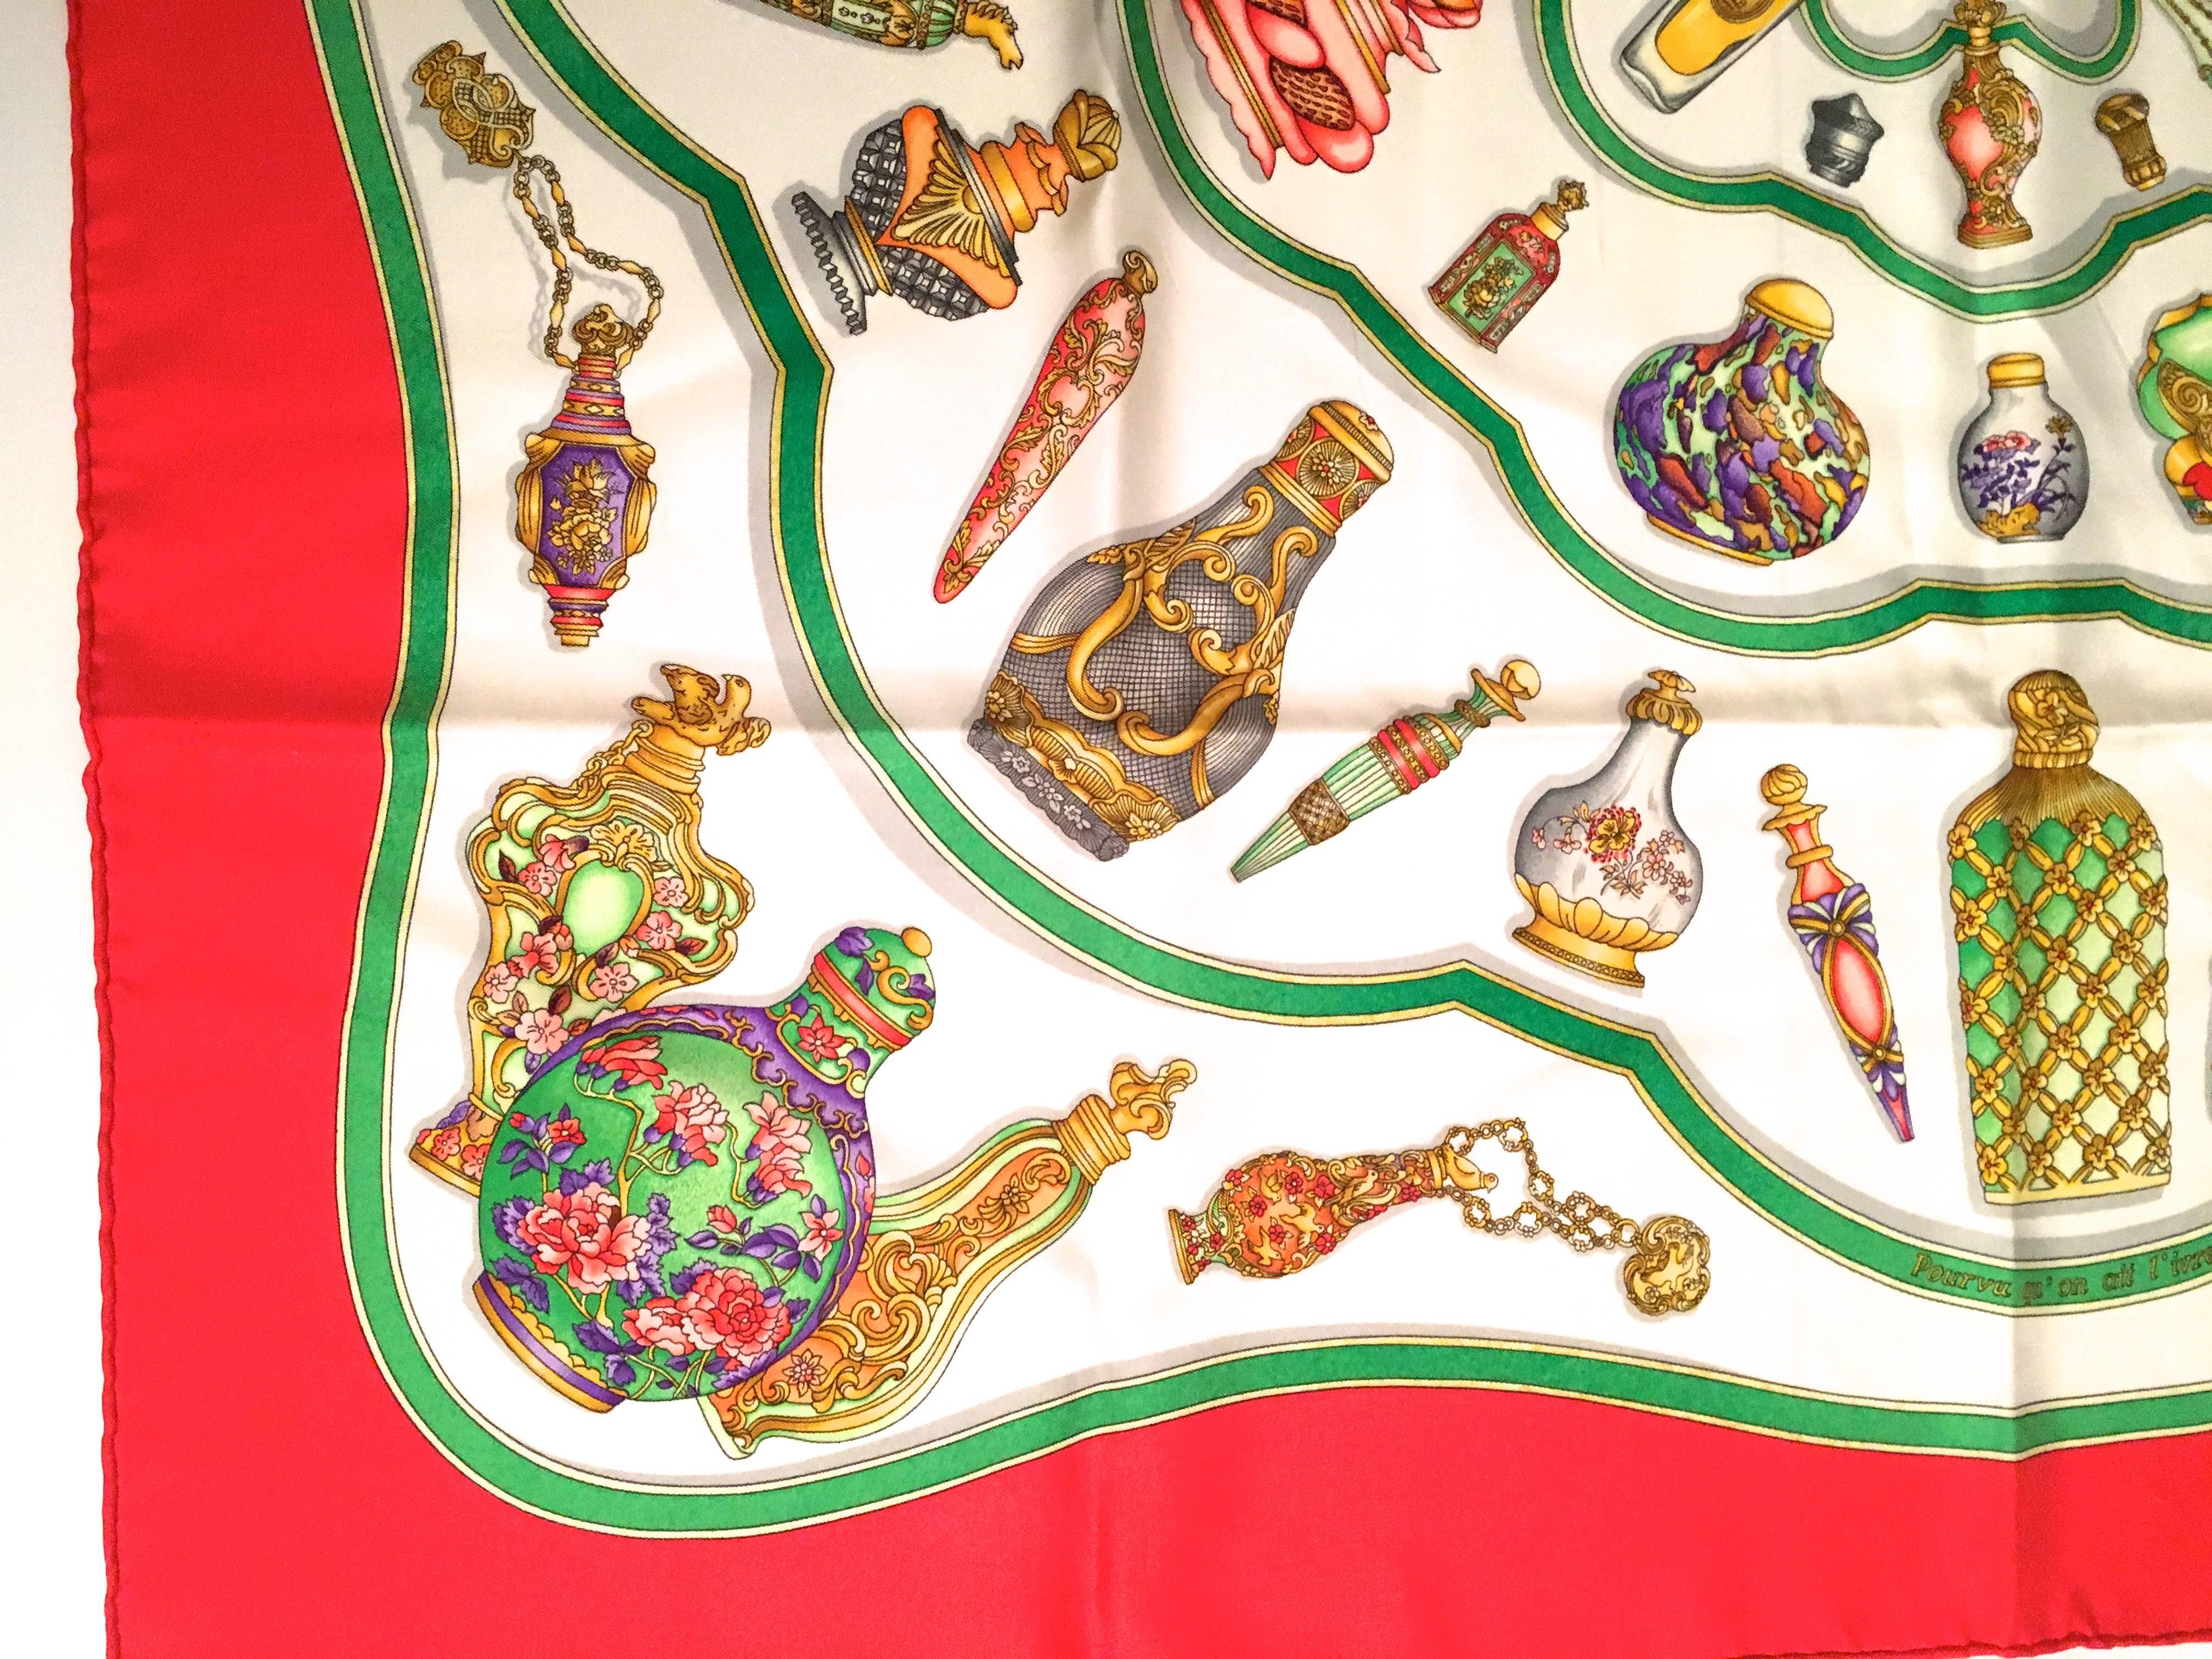 Presented here is a fabulous scarf from Hermes Paris. This vintage scarf was released in 1988 and is a composition of various elaborate bottles of numerous shapes, designs and sizes. The tag line is 